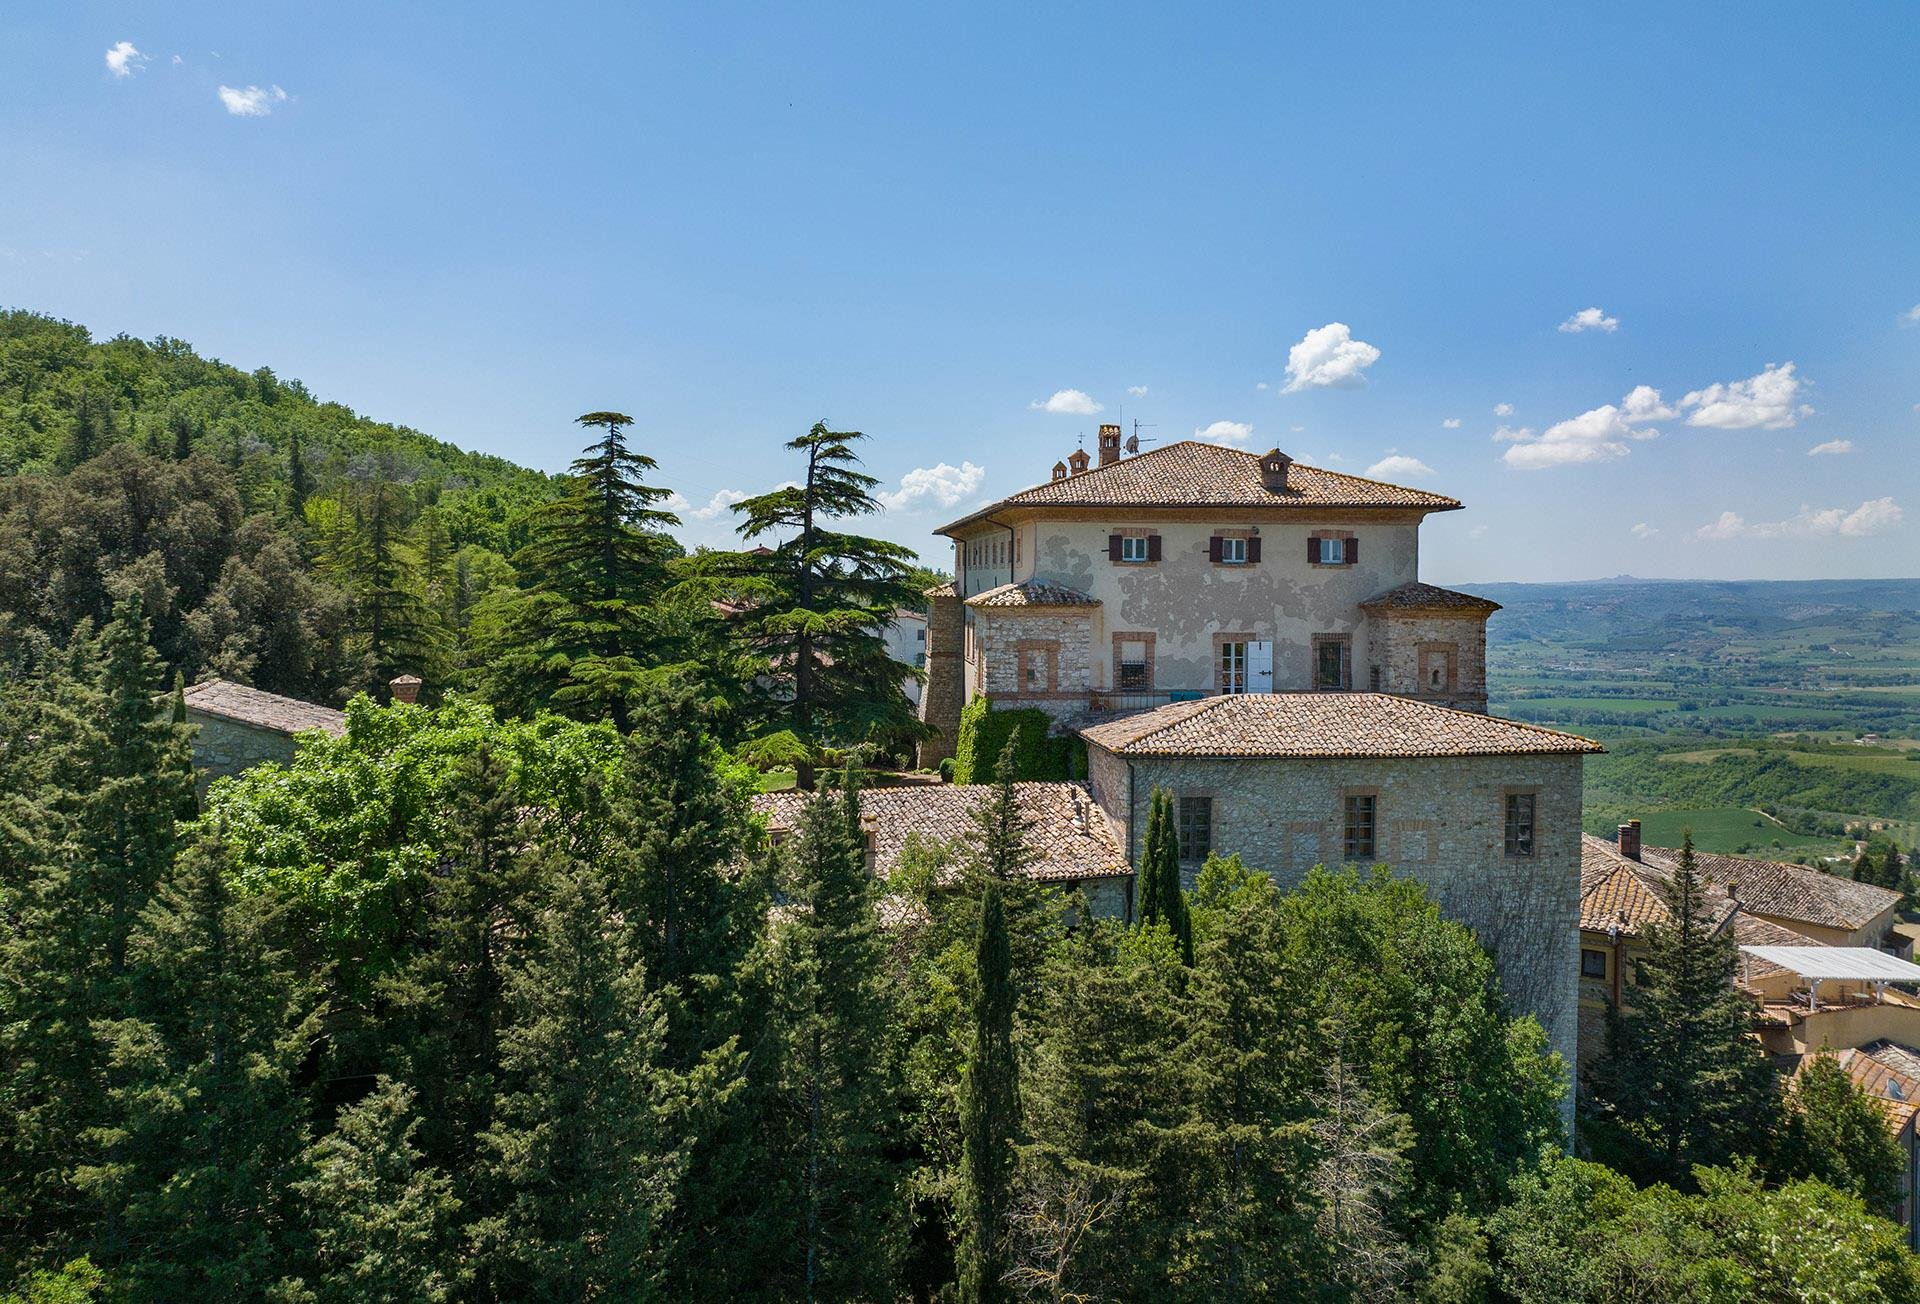 Francis York Historic Palazzo For Sale in Umbria, Italy Set in Private Park 4.jpg